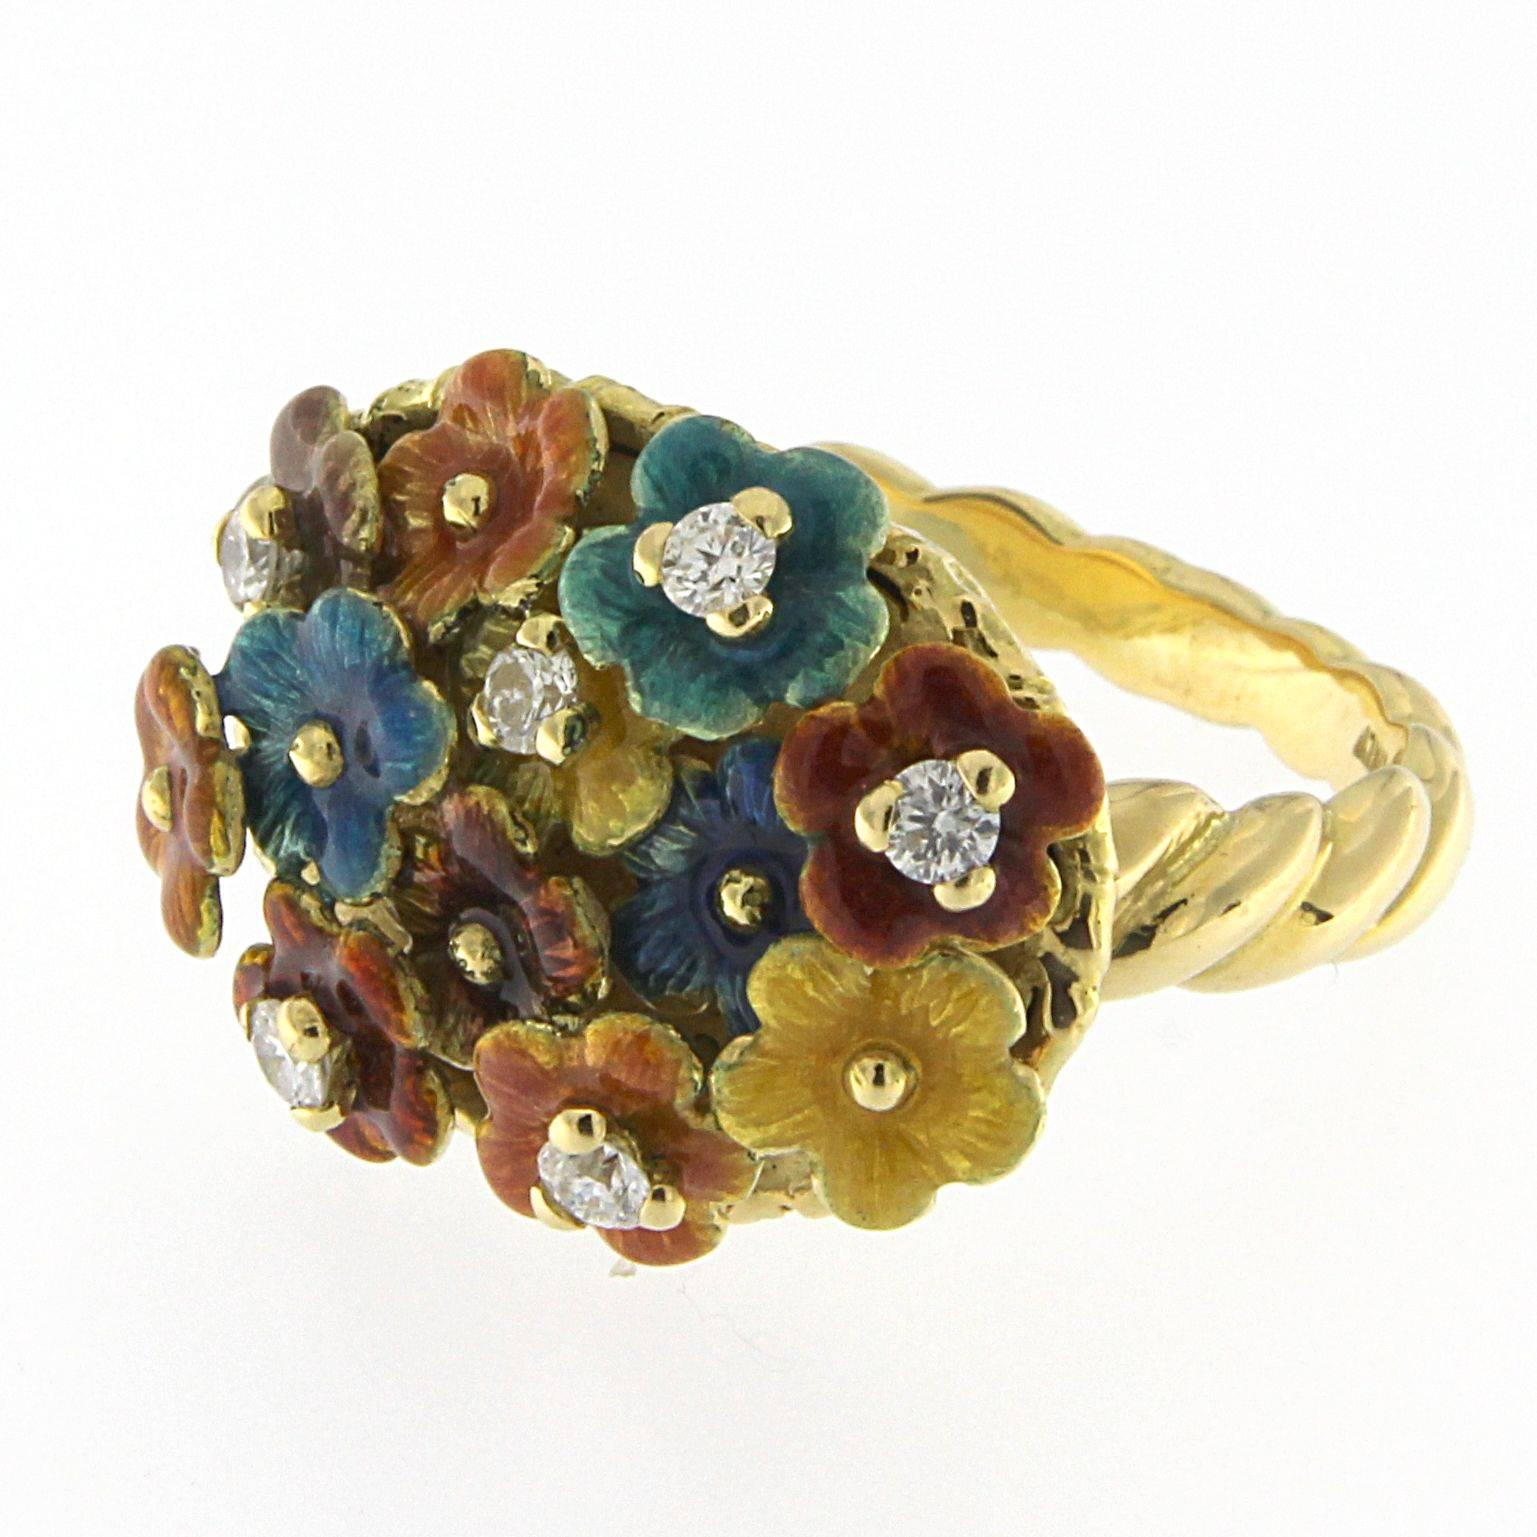 Ring Dreem  Collection in 18 kt  yellow gold white diamonds
The mastery of enamel by fire certainly finds its maximum expression in objects like this

the total weight of the gold of the ring is  gr 14.80
the total weight of the white diamonds is ct